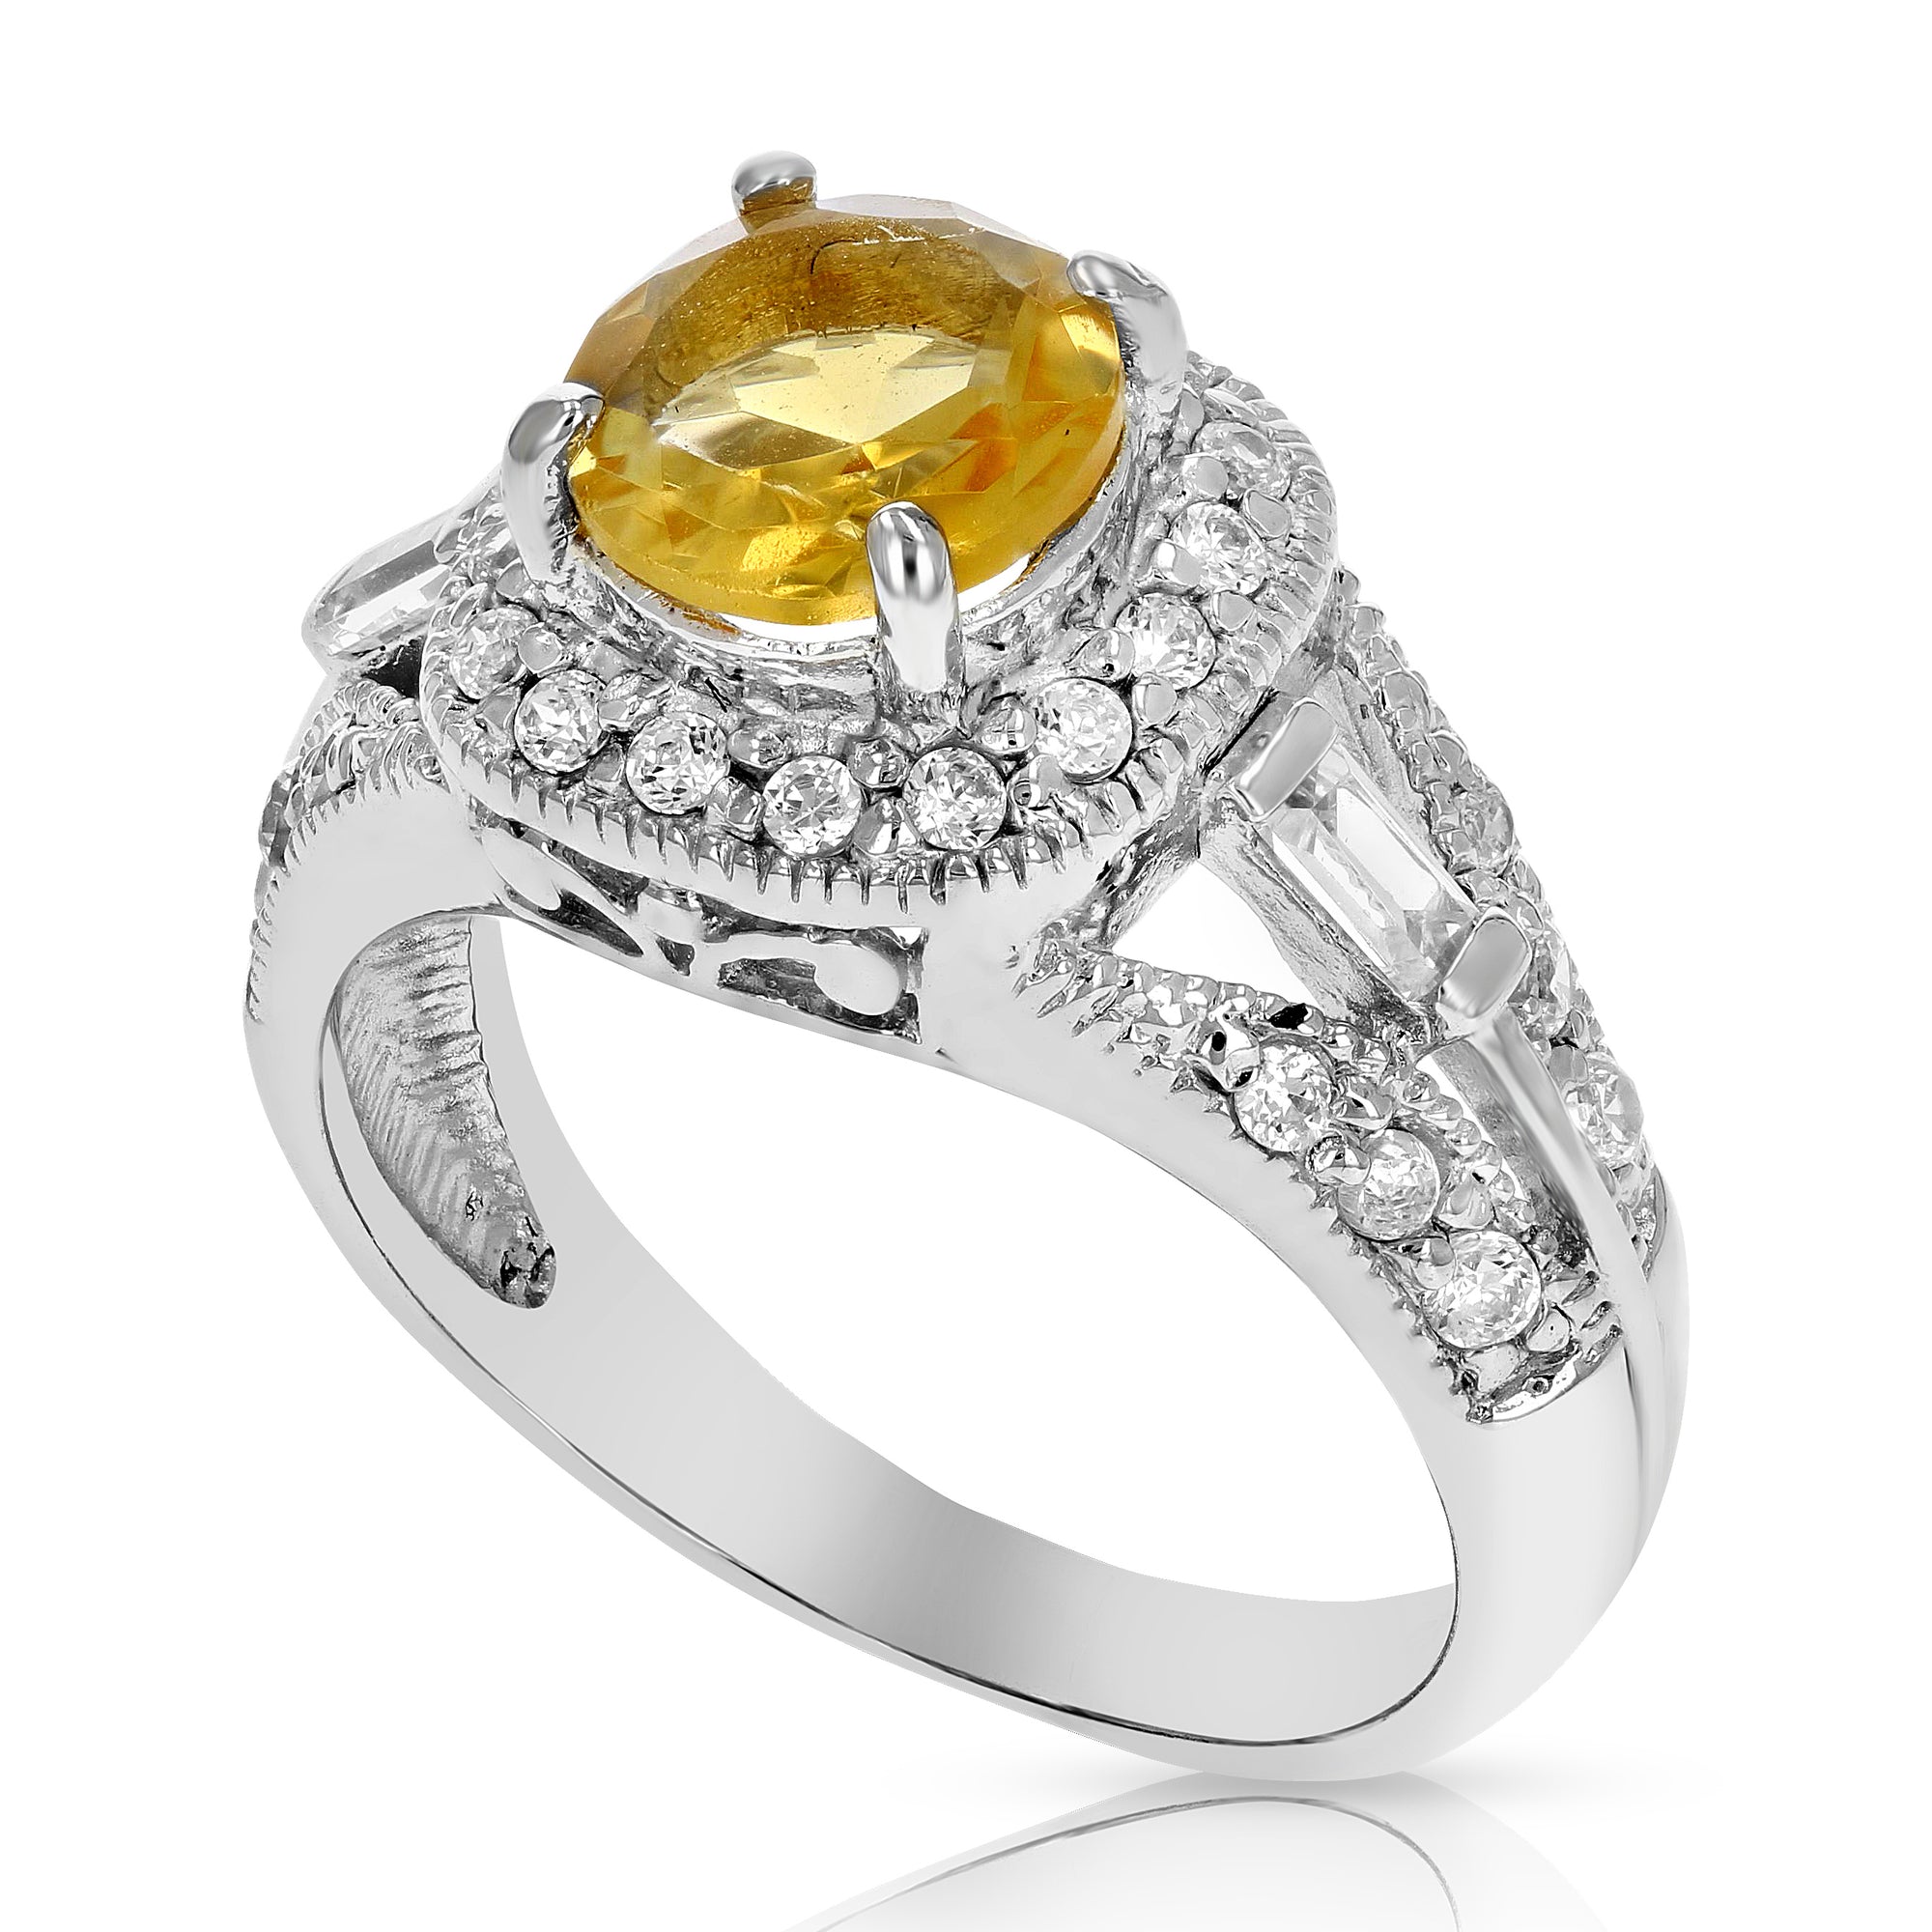 1 cttw Citrine Ring .925 Sterling Silver with Rhodium Plating Round Shape 7 MM